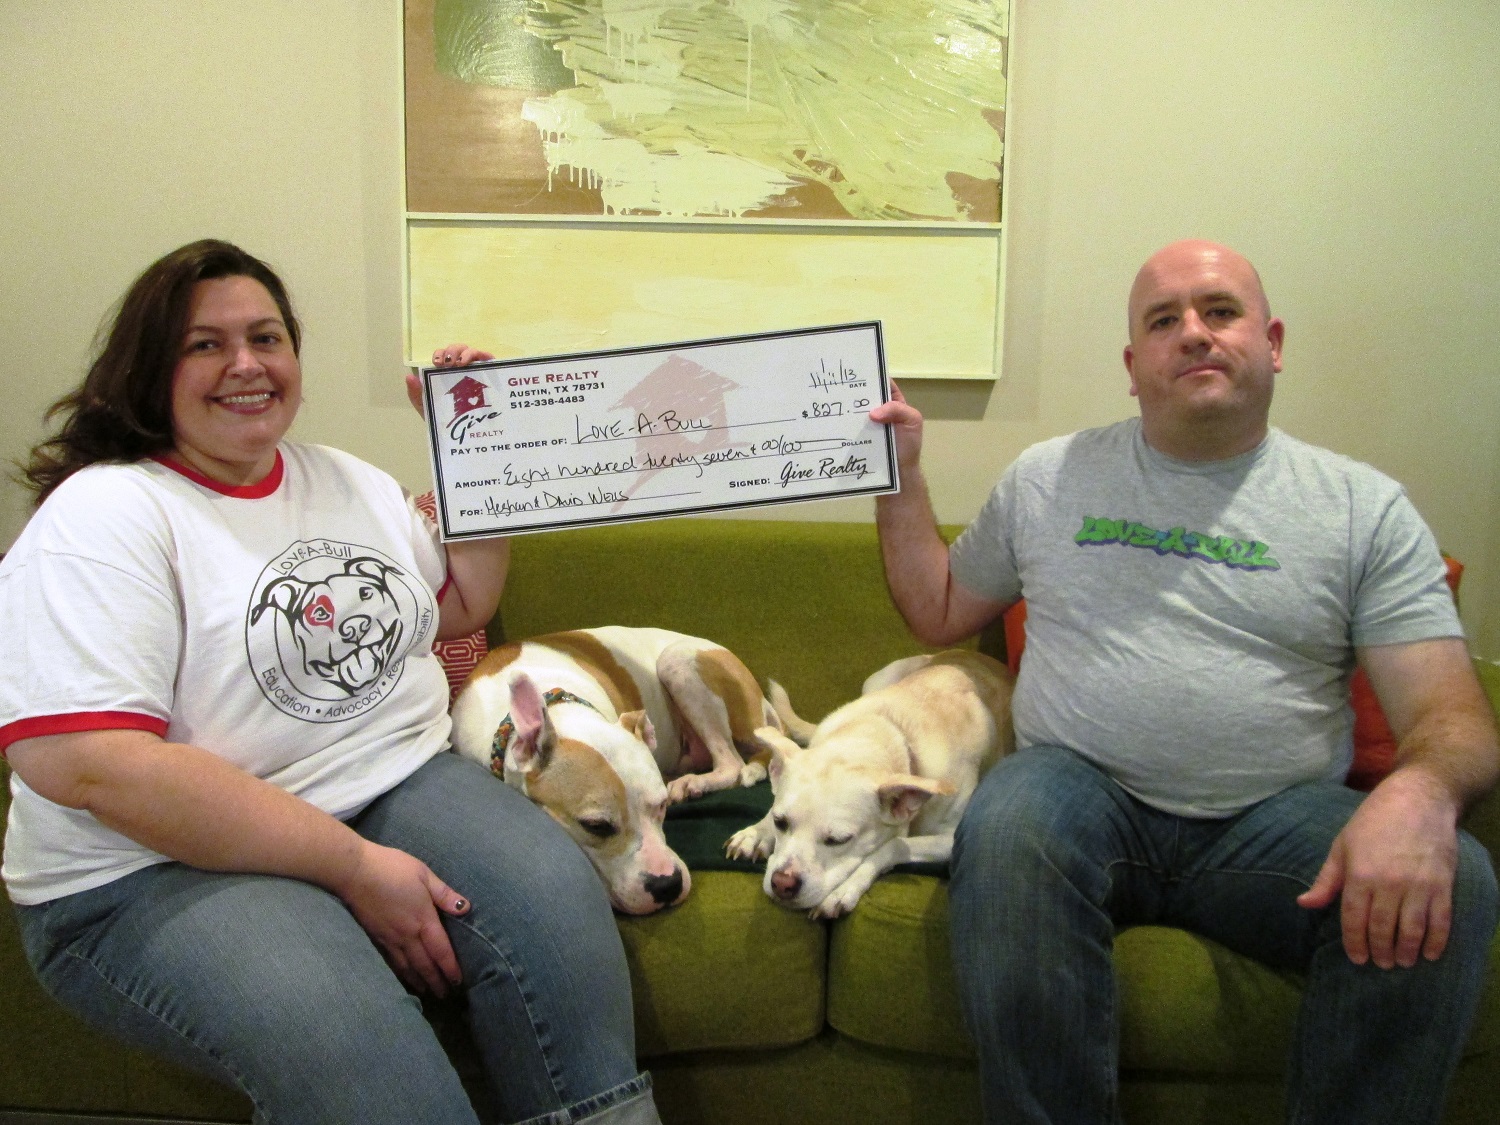 $827.00 Donated to Love-A-Bull on Behalf of Meghan and David Wells